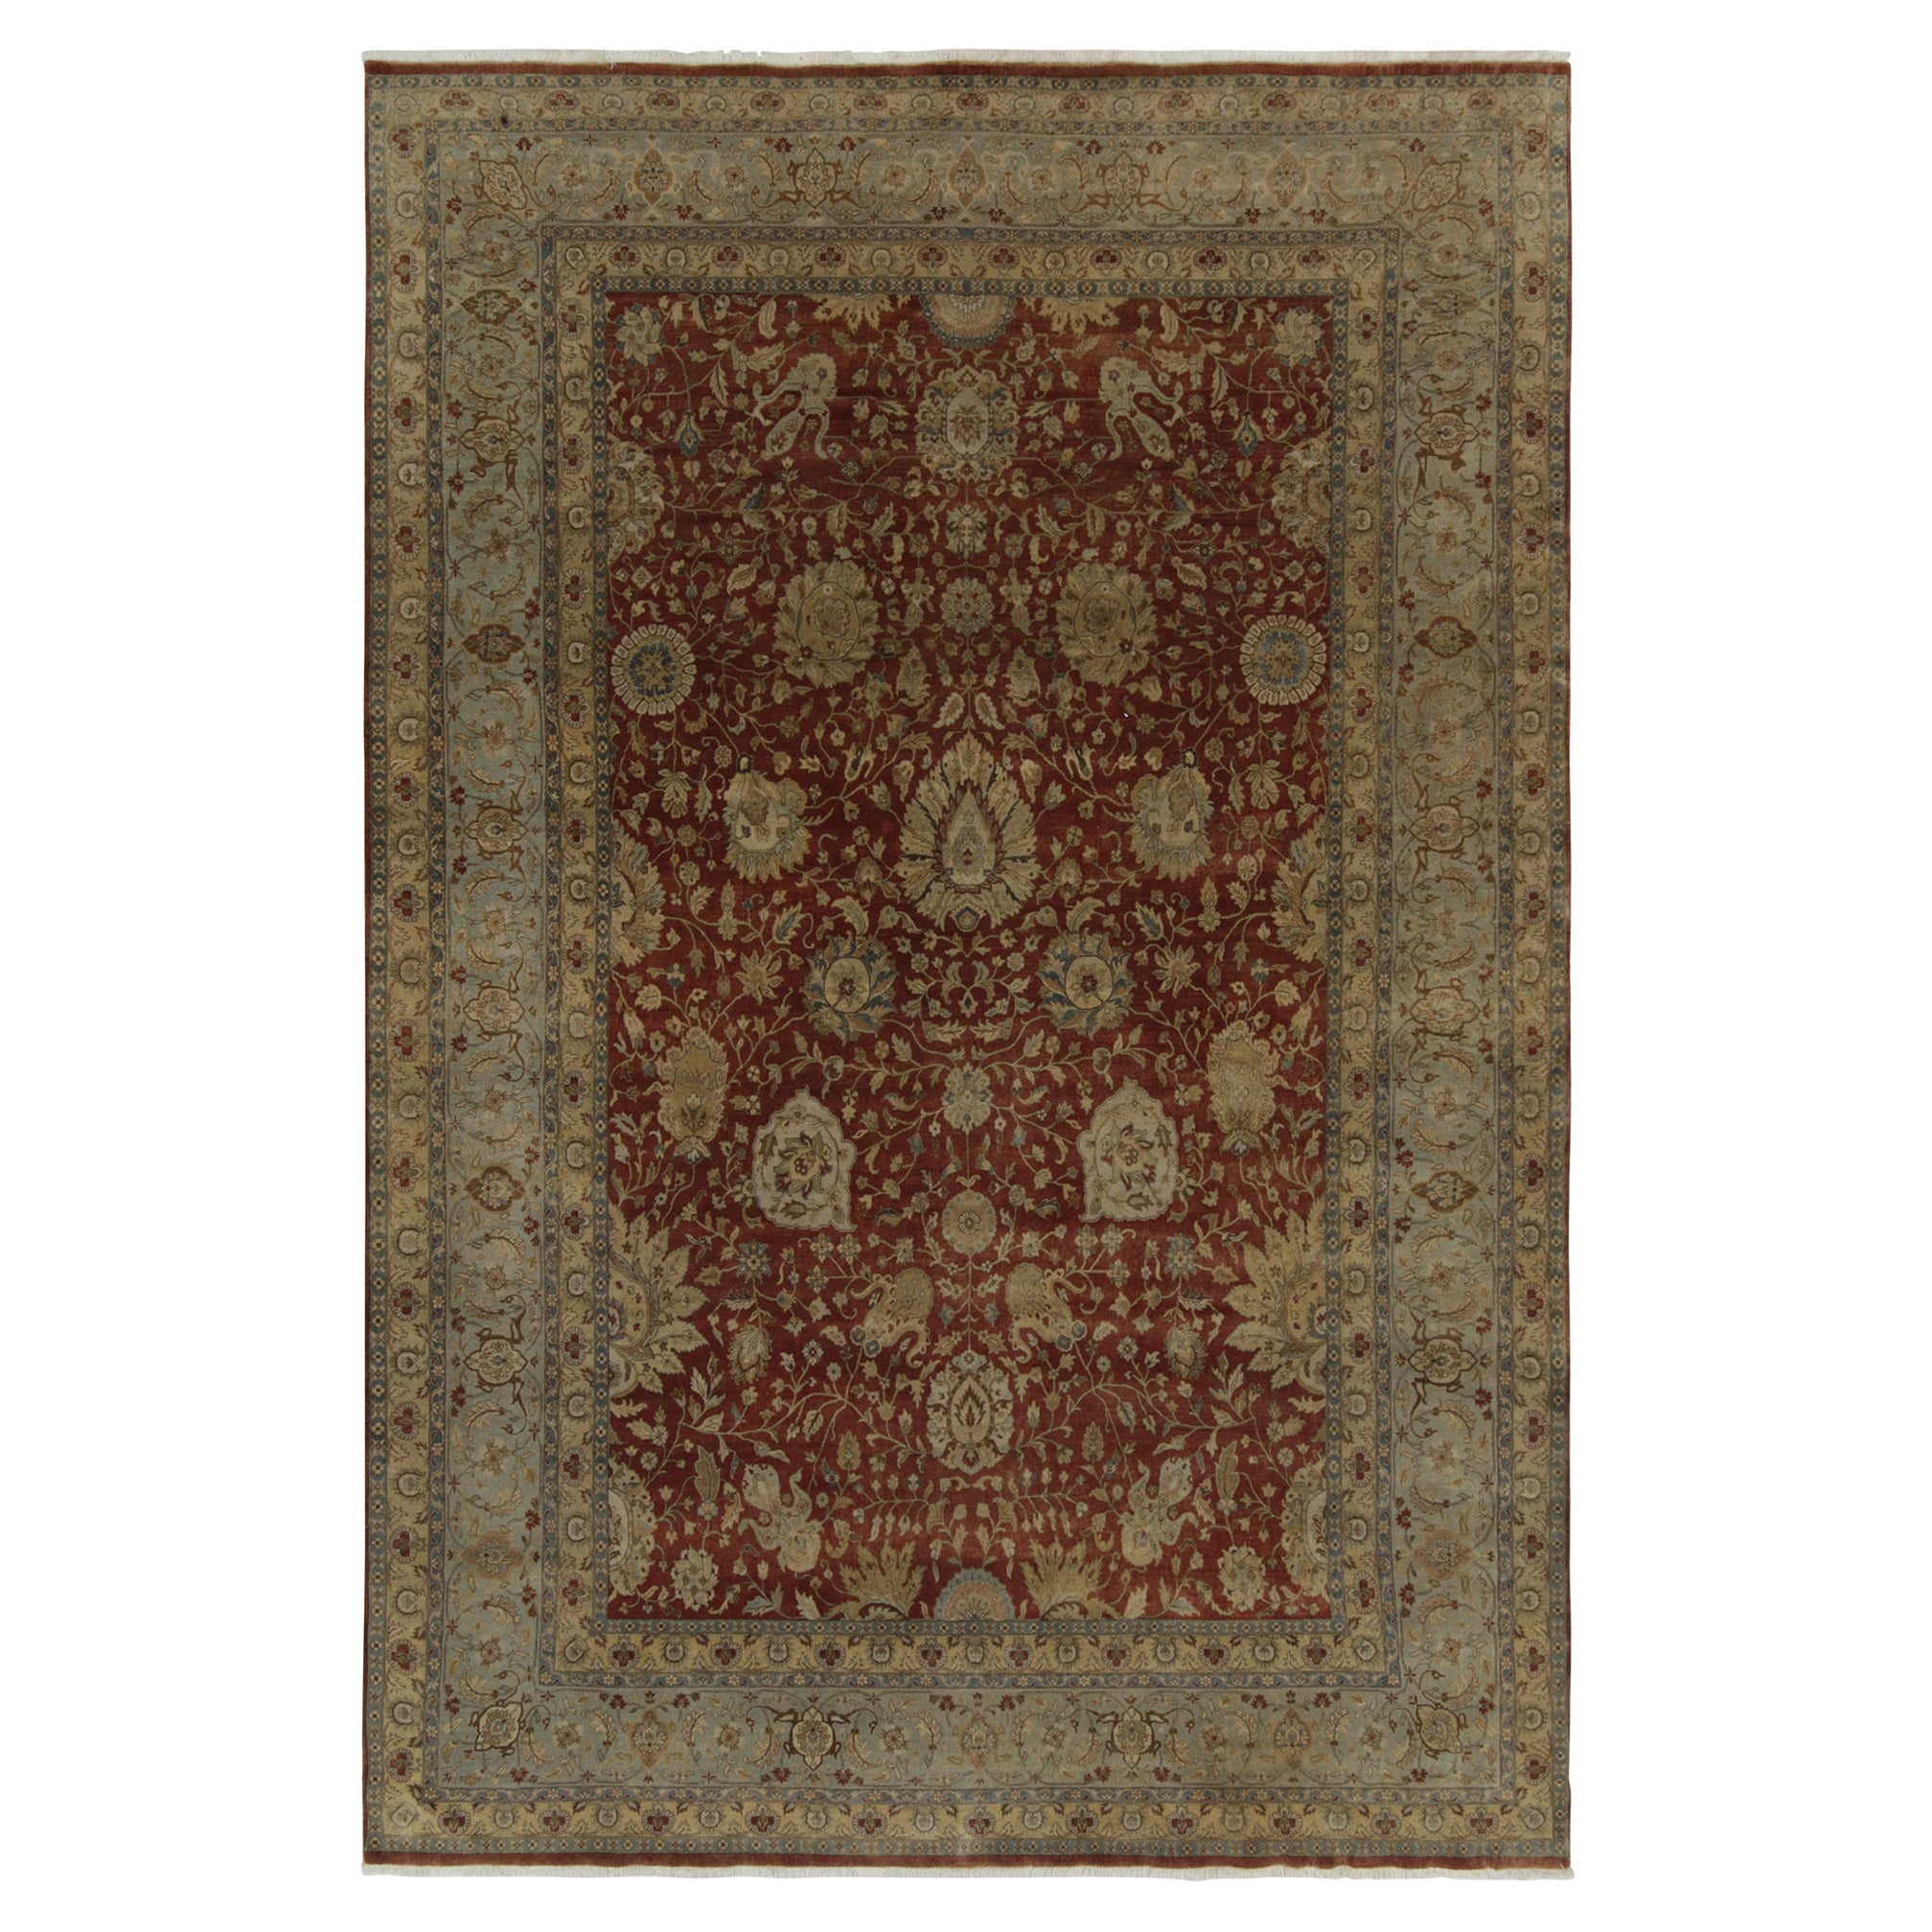 Rug & Kilim’s Classic Tabriz style rug with Beige & Blue Florals on Rust Red